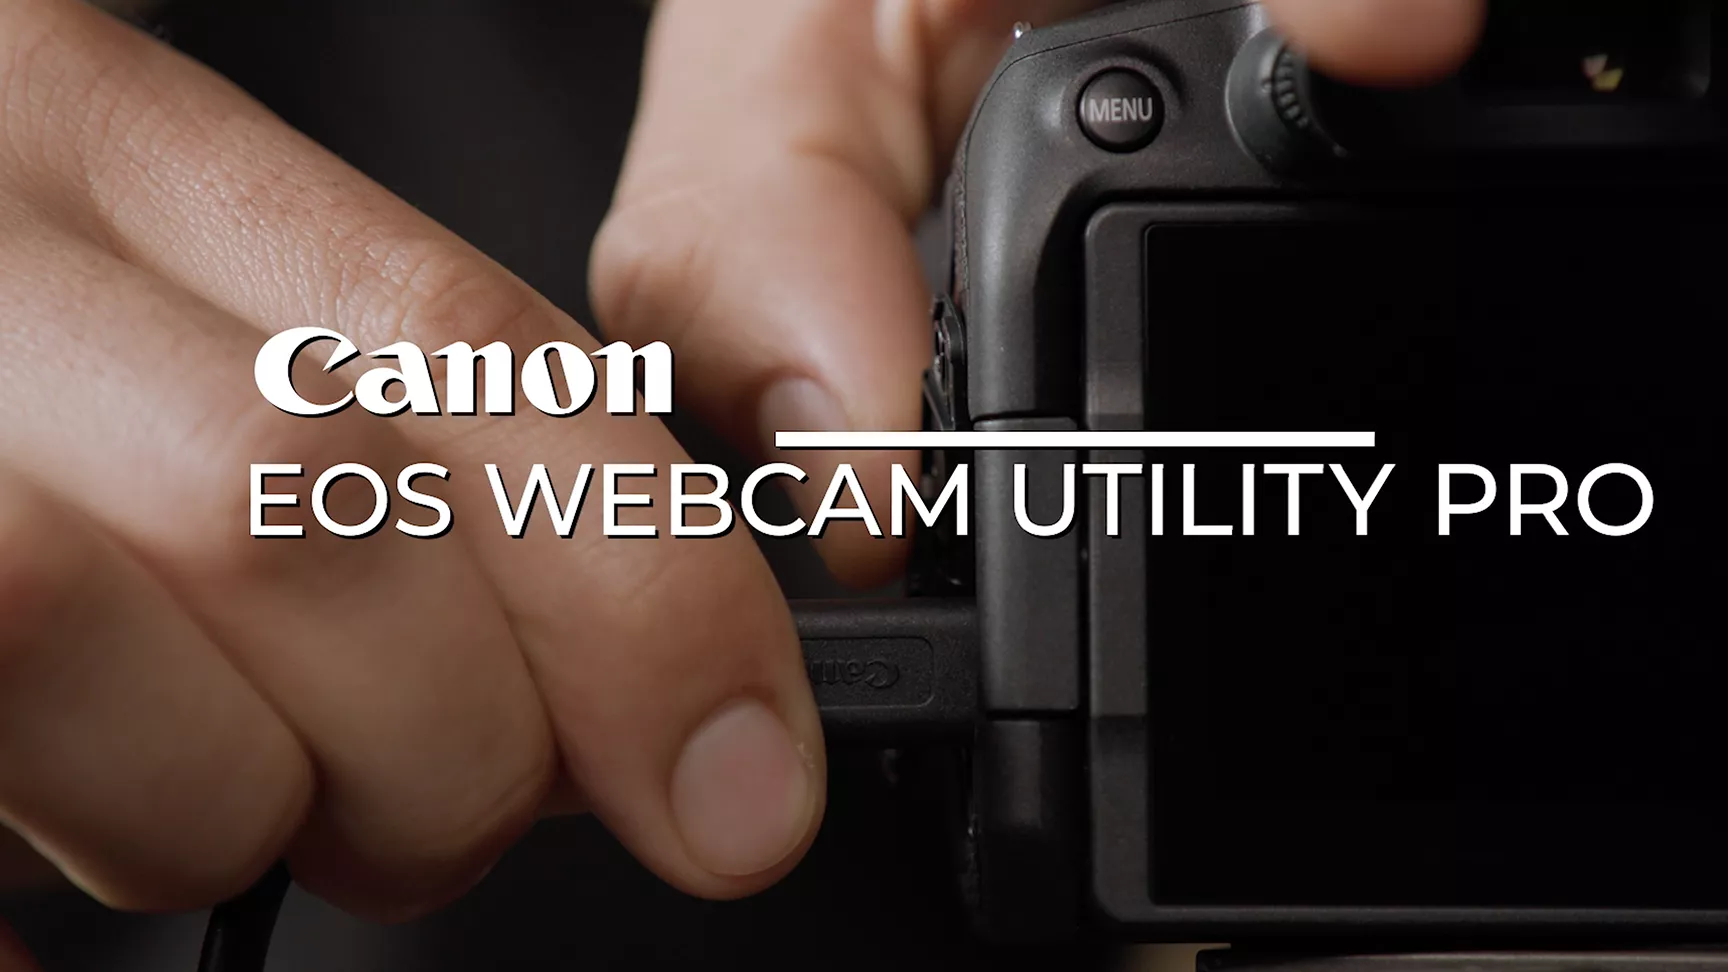 Webcam FAQ: All U Need to Know About Web Cameras